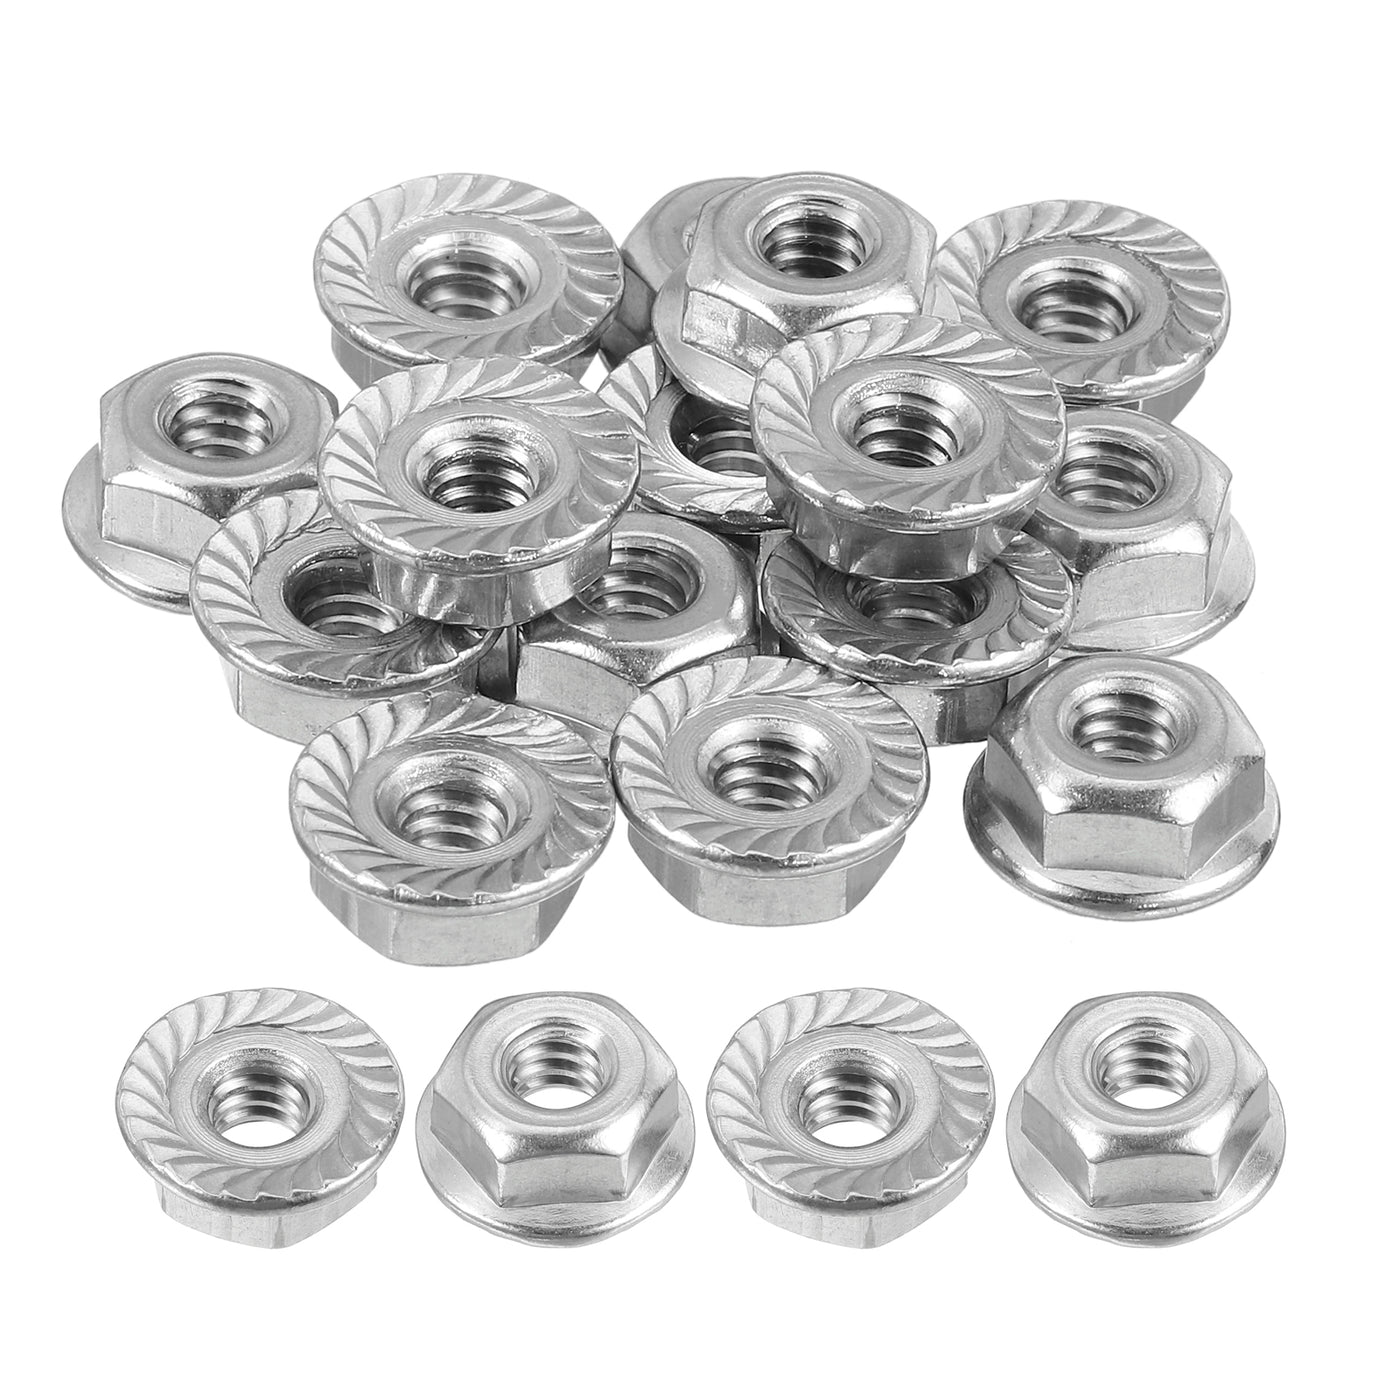 uxcell Uxcell #10-24 Serrated Flange Hex Lock Nuts, 15Pcs 304 Stainless Steel Flange Nut